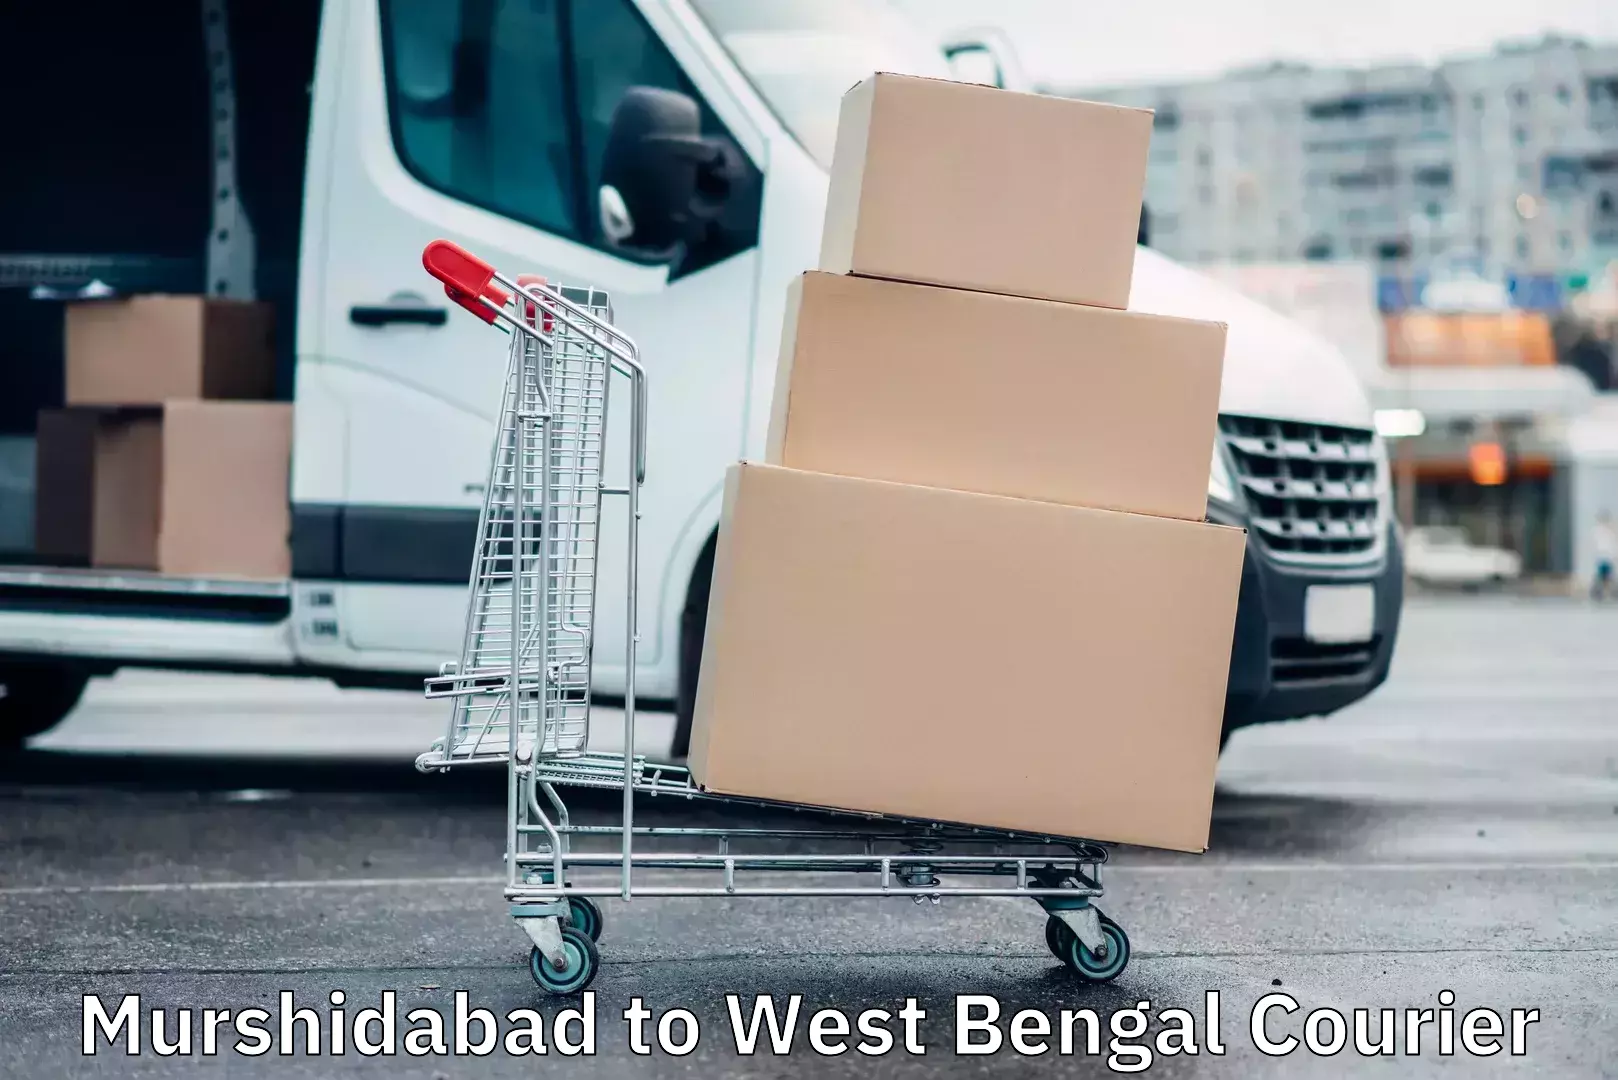 Express postal services in Murshidabad to West Bengal